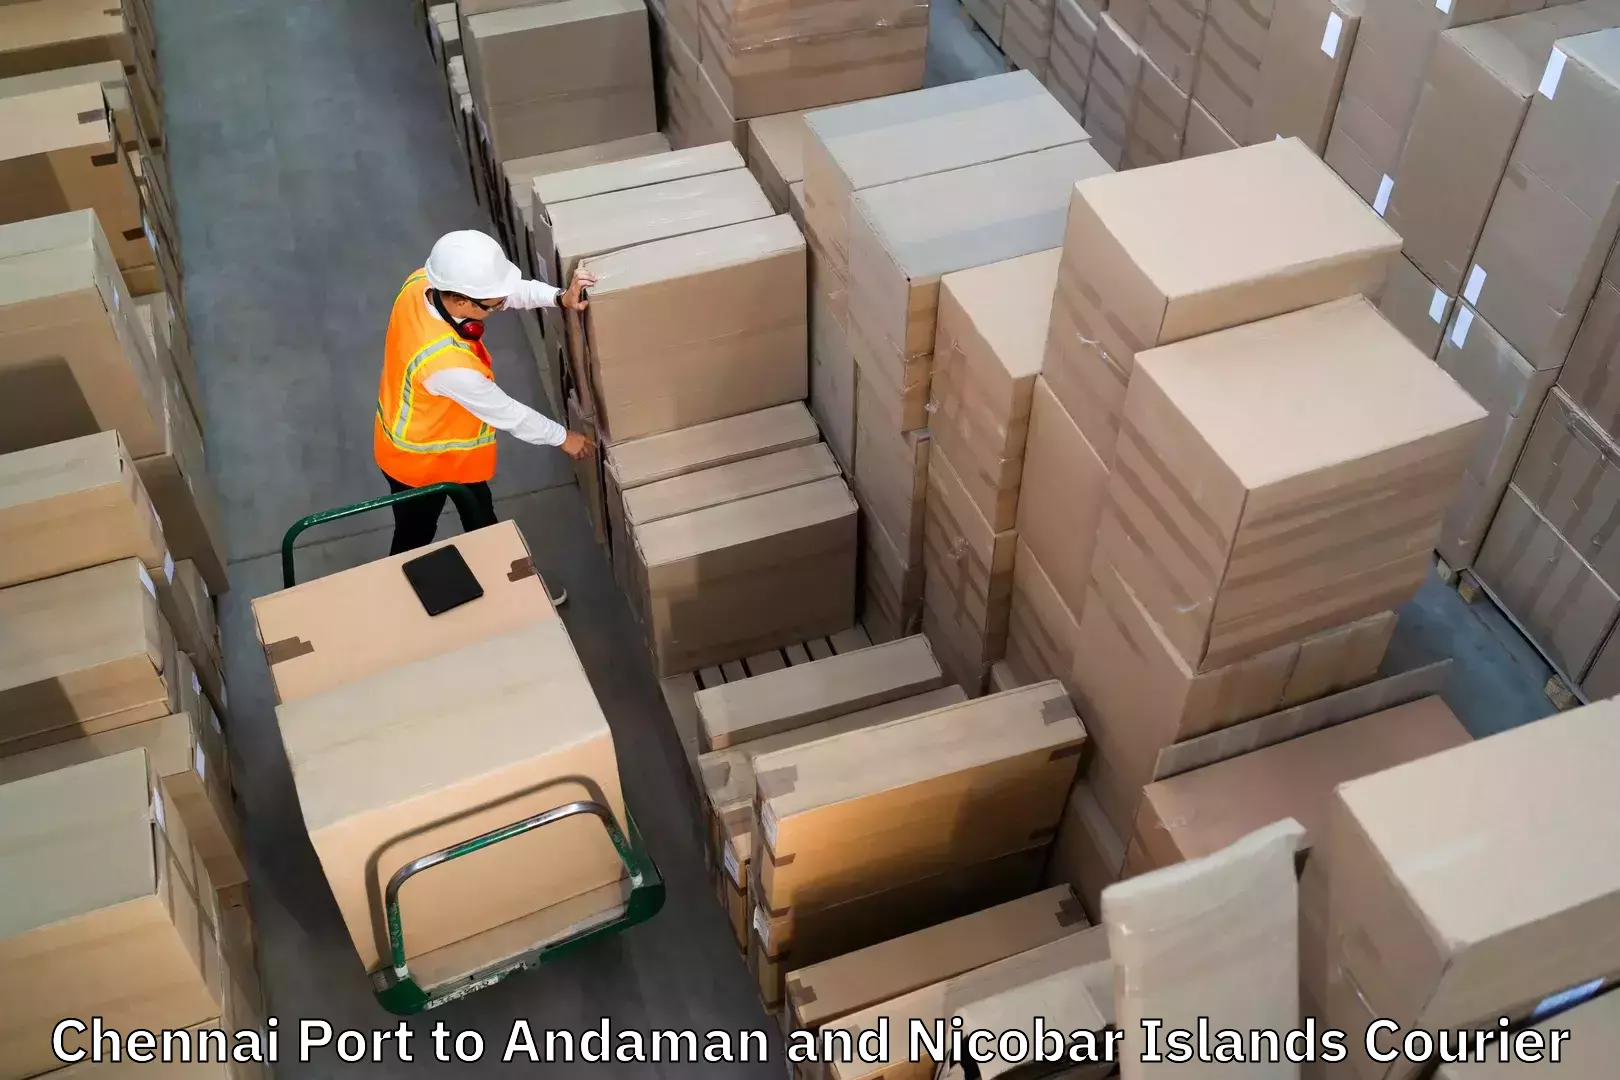 Same day luggage service Chennai Port to North And Middle Andaman